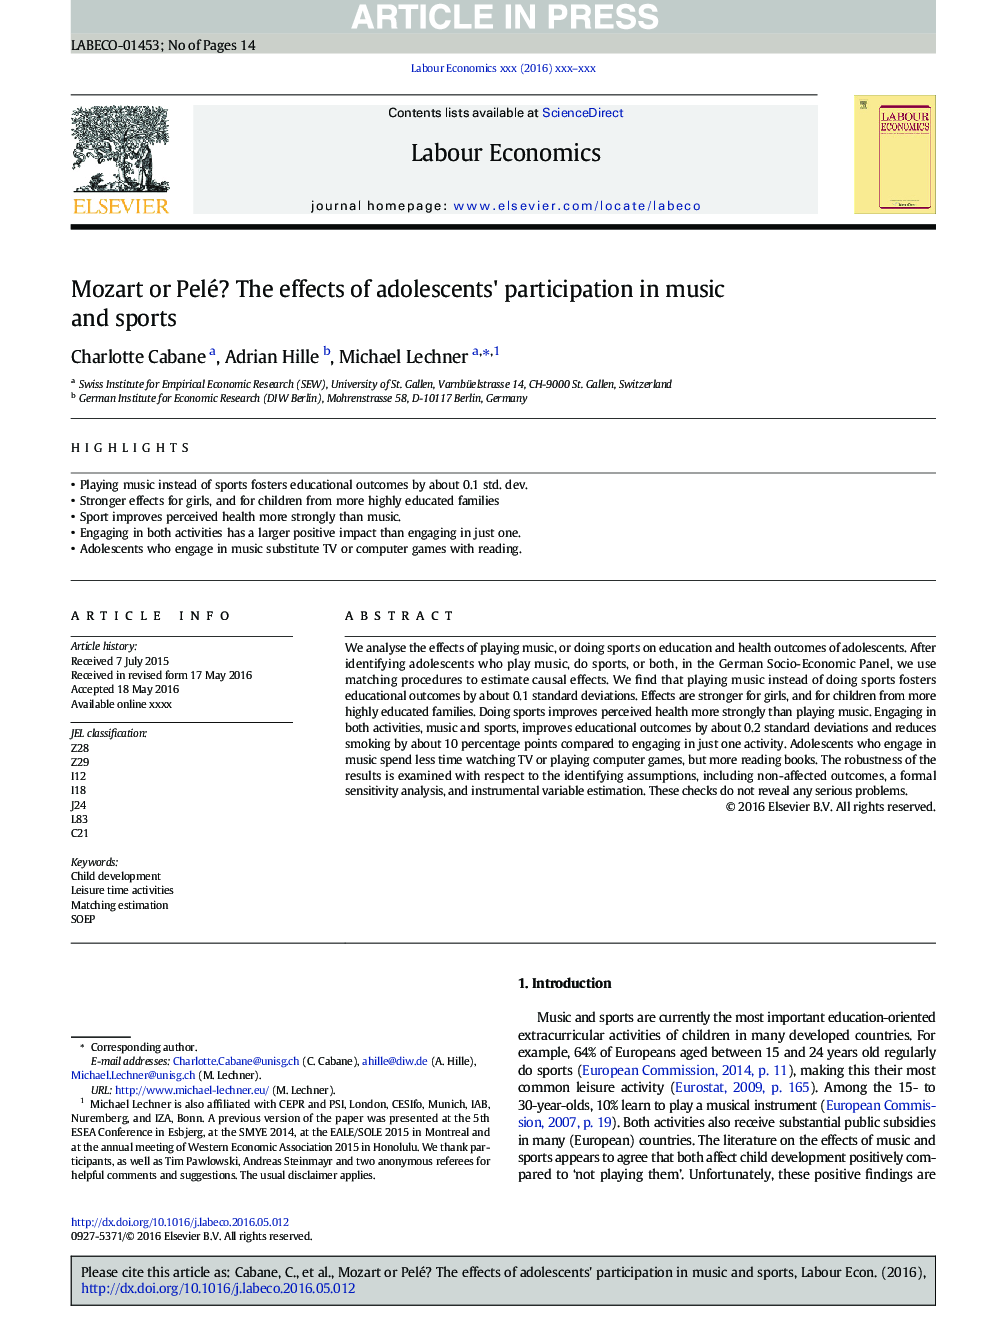 Mozart or Pelé? The effects of adolescents' participation in music and sports